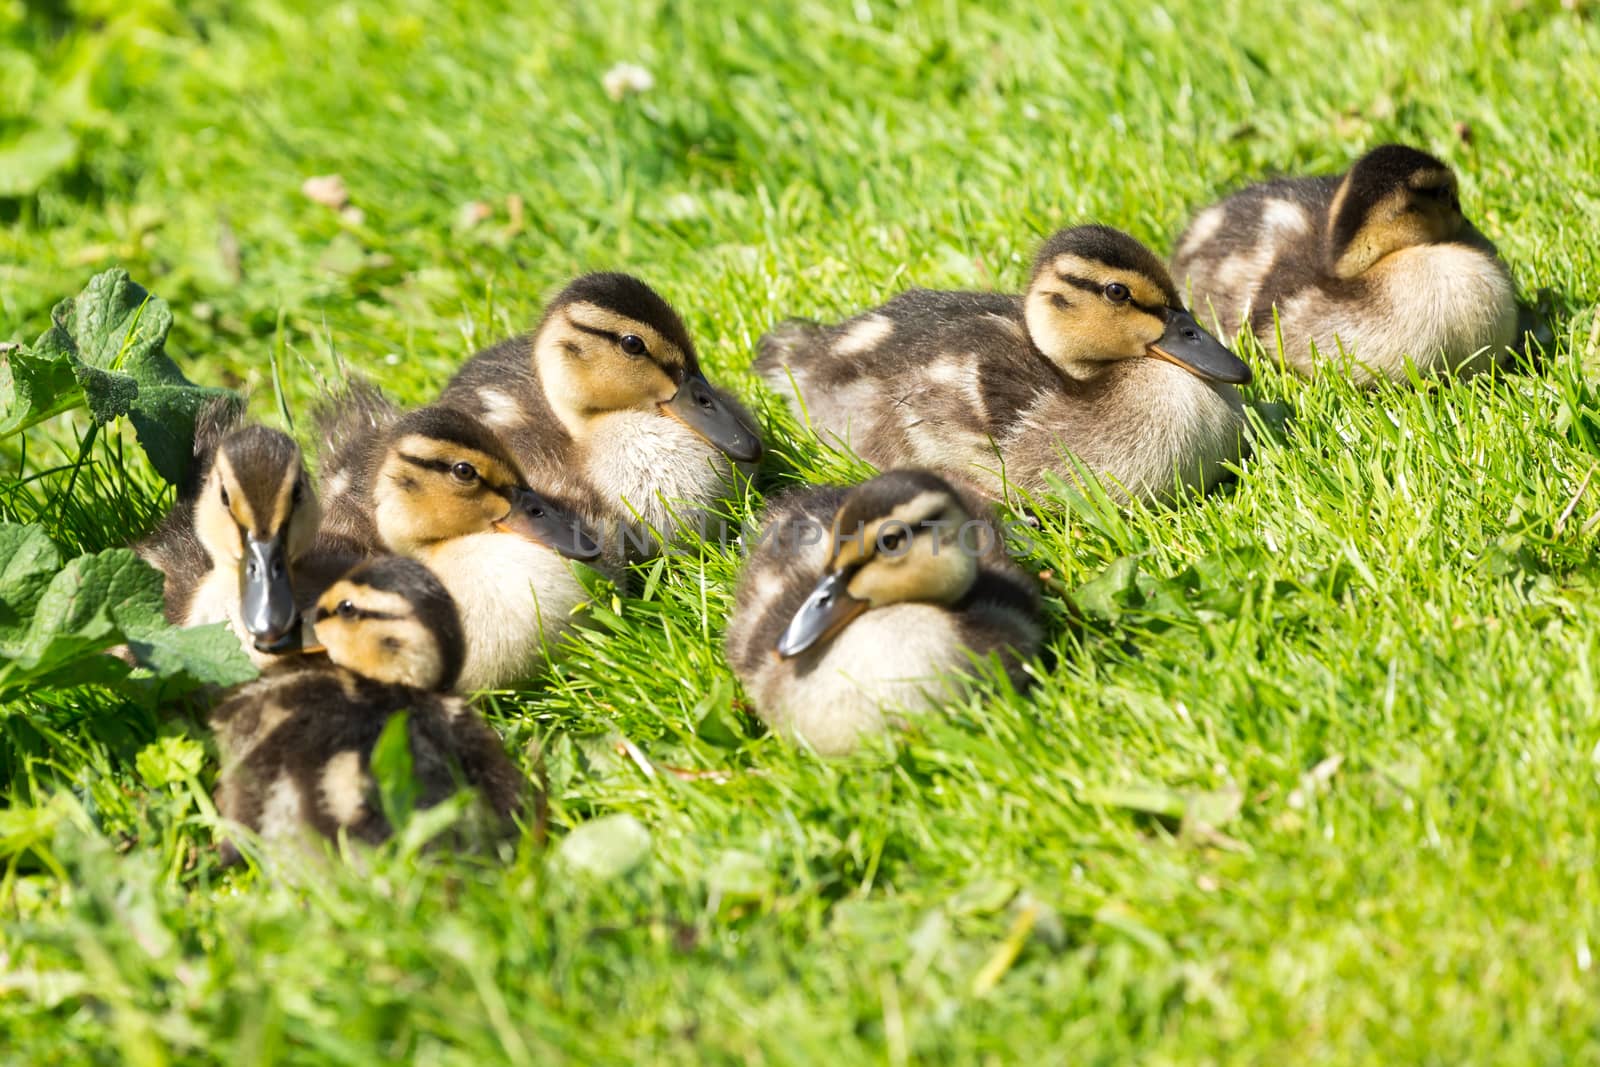 ducklings by Stootsy